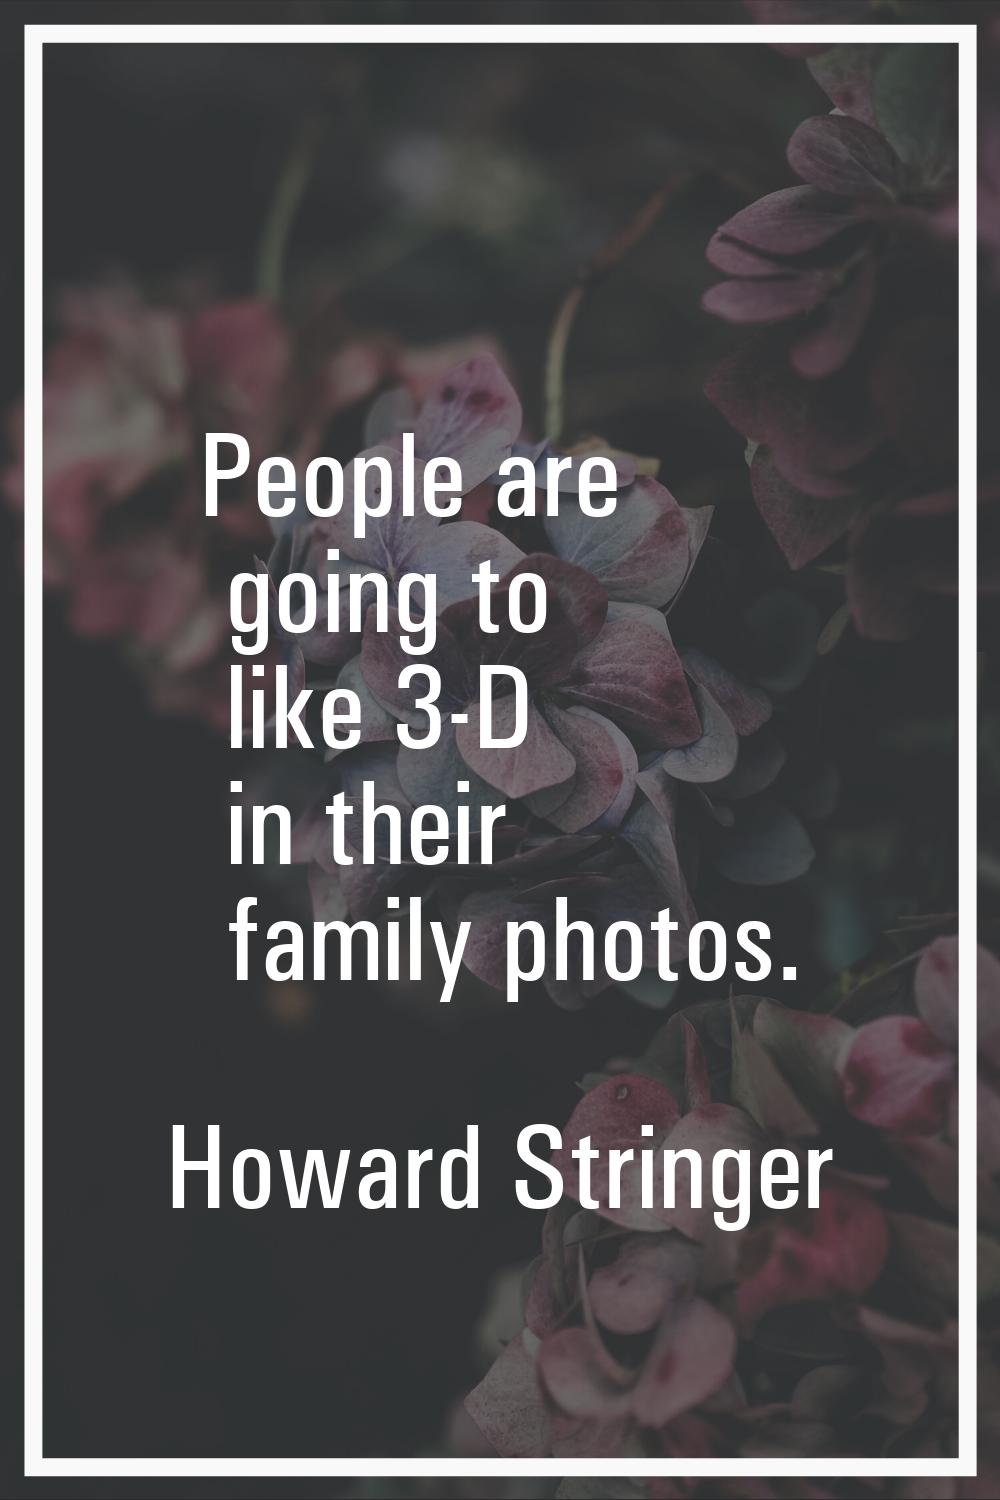 People are going to like 3-D in their family photos.